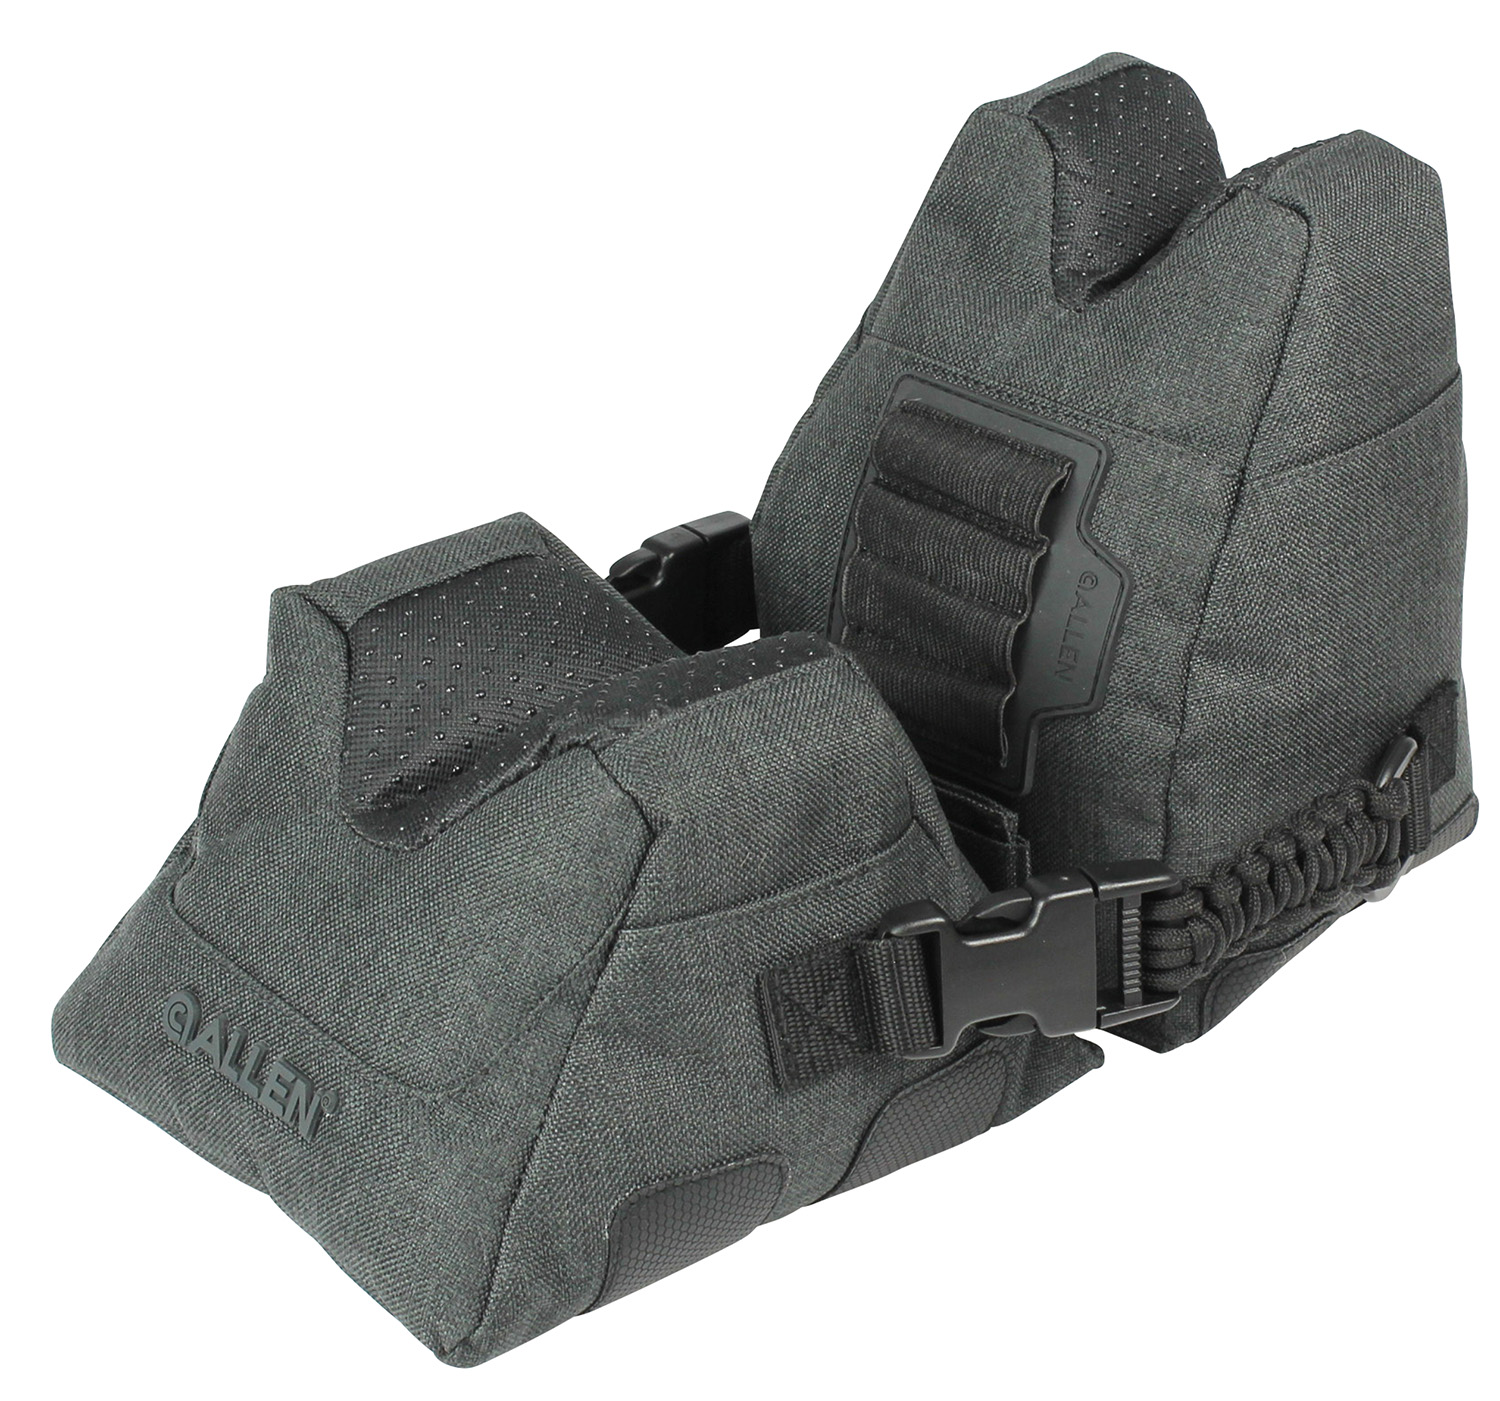 Allen 18417 Eliminator Shooting Rest Prefilled Front and Rear Bag made of Gray Polyester, weighs 4.50 lbs, 11.50